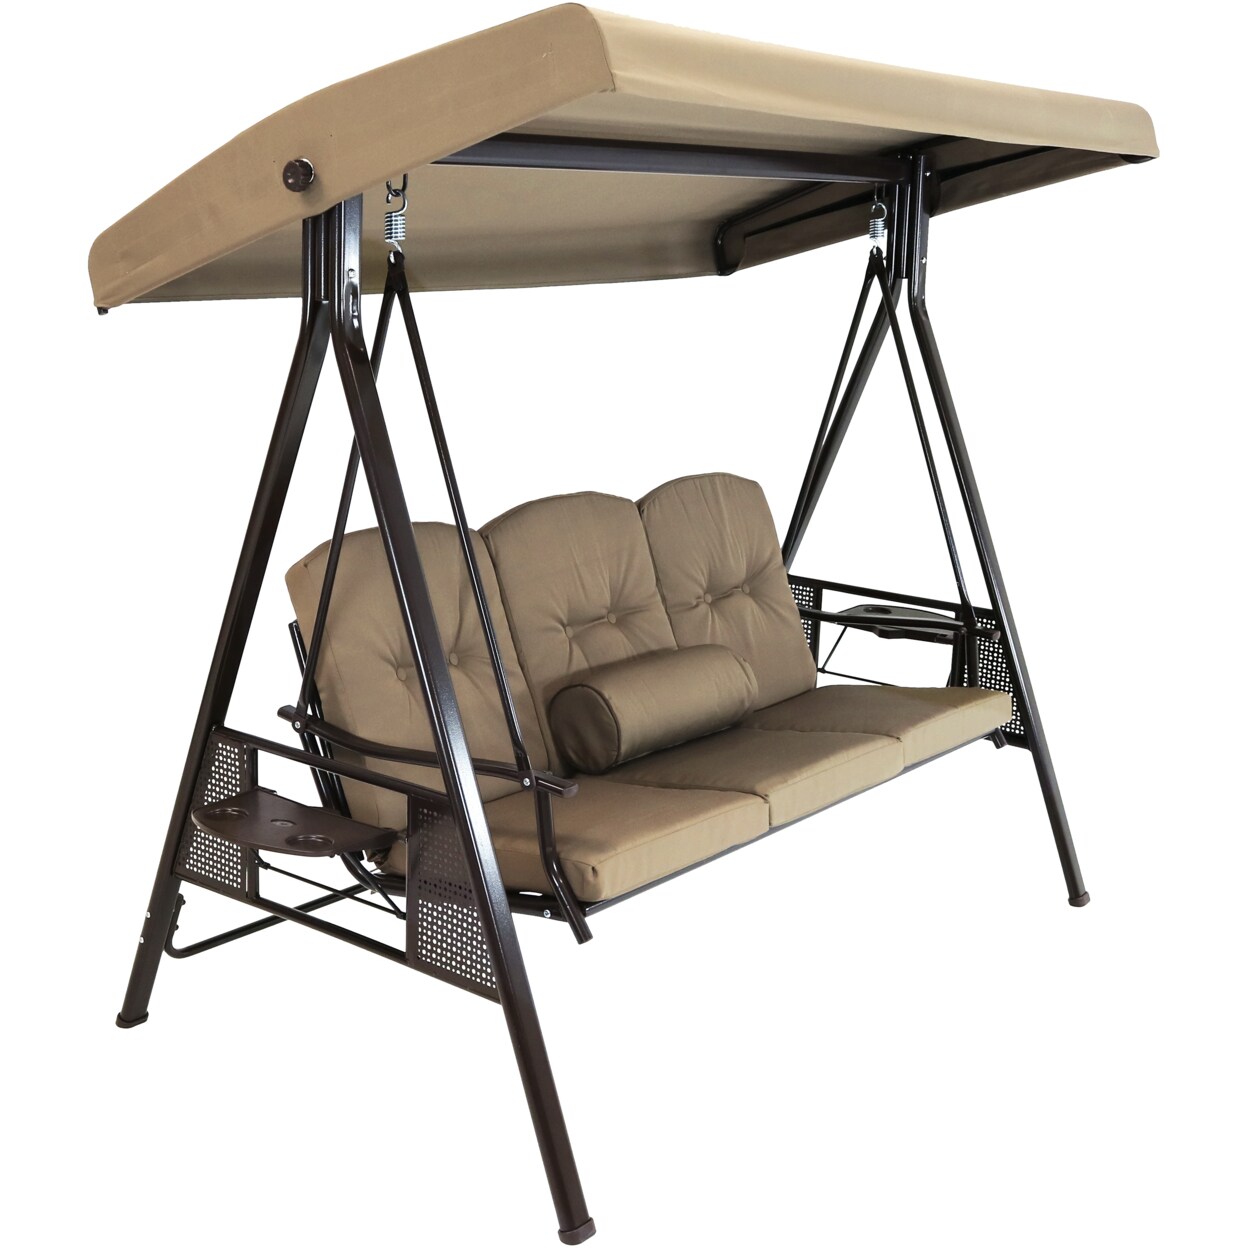 Sunnydaze   3-Person Steel Patio Swing Bench with Side Tables/Canopy - Beige